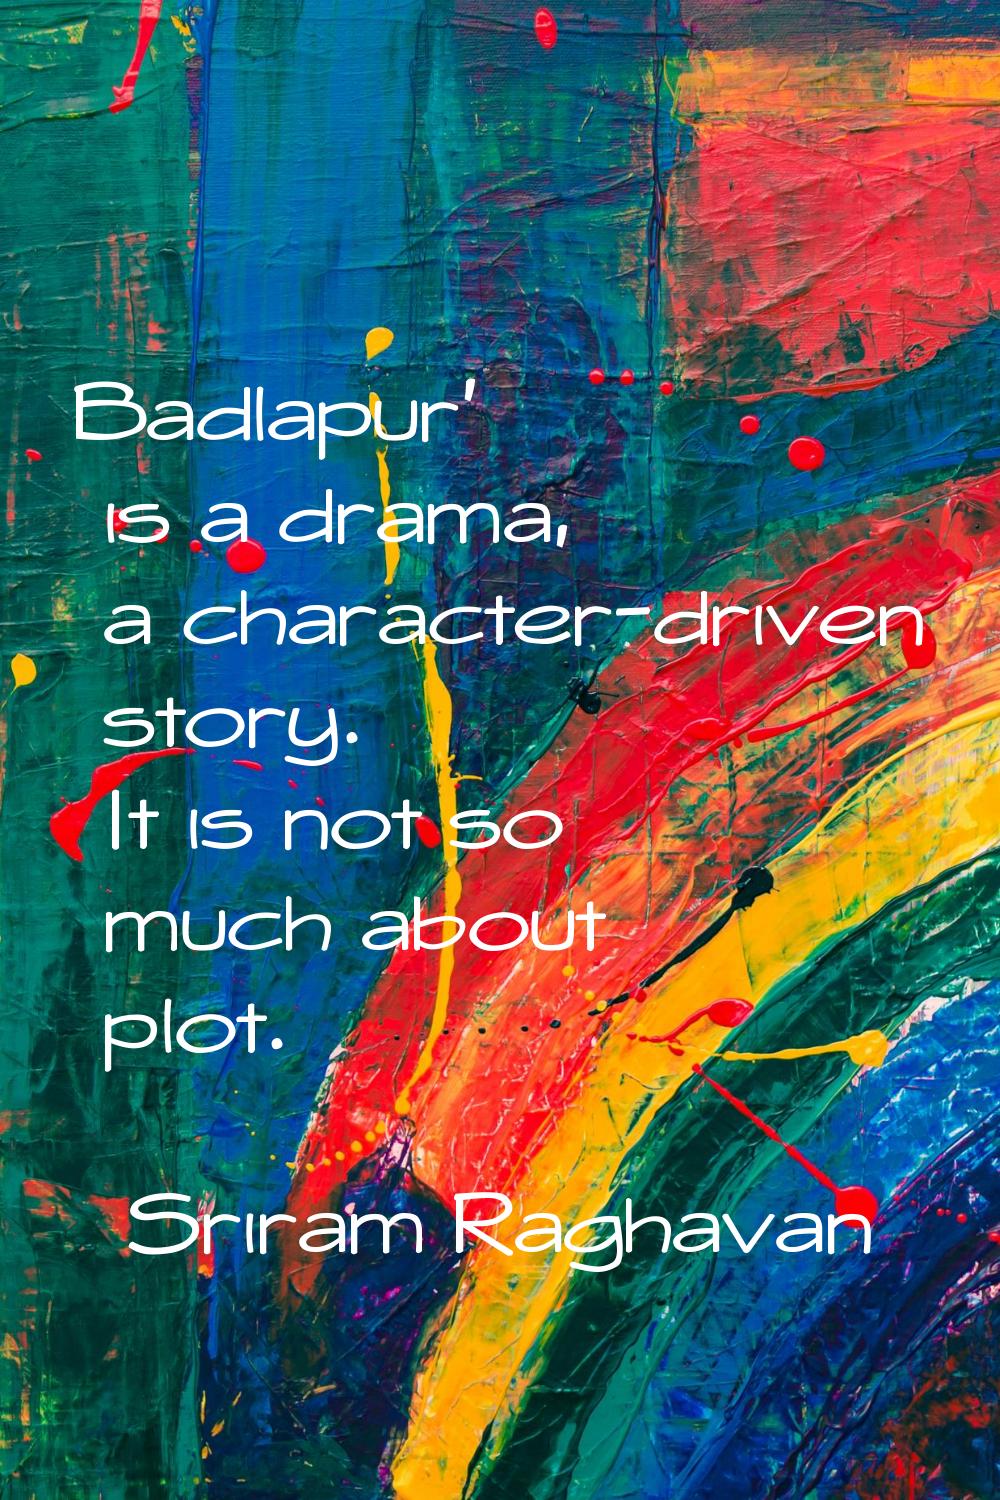 Badlapur' is a drama, a character-driven story. It is not so much about plot.